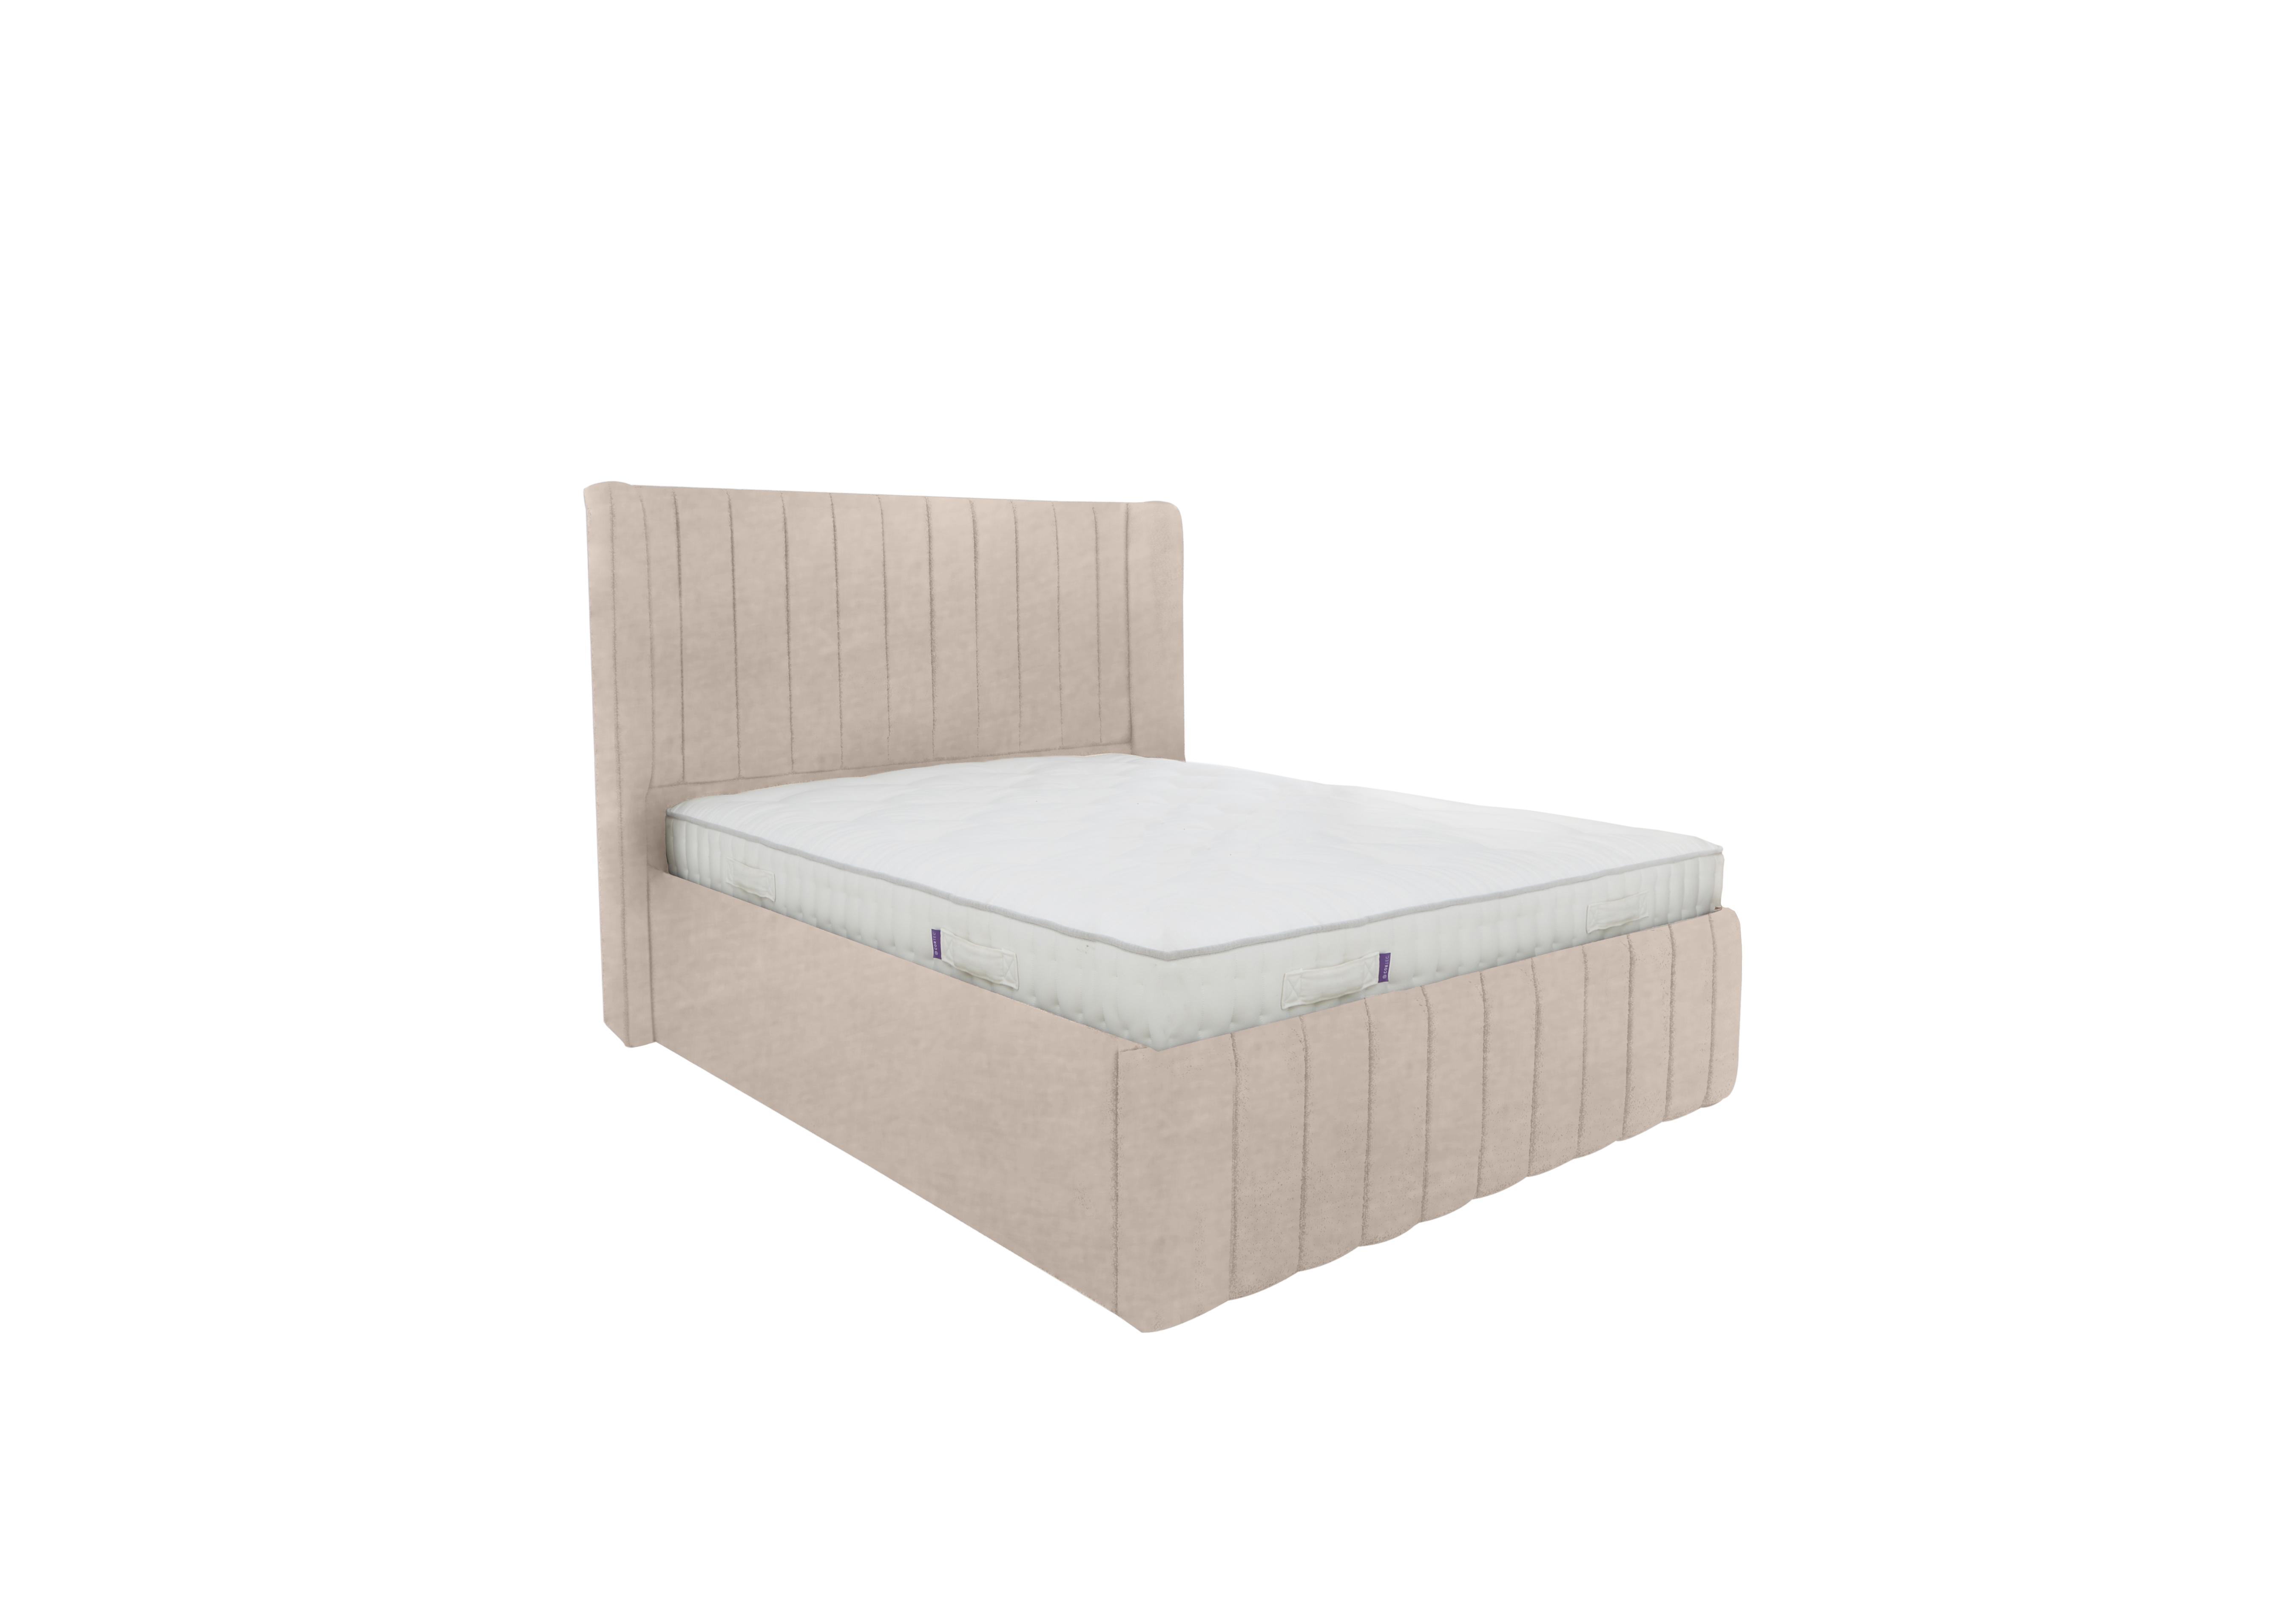 Eira Low Foot End Bed Frame in Savannah Almond on Furniture Village